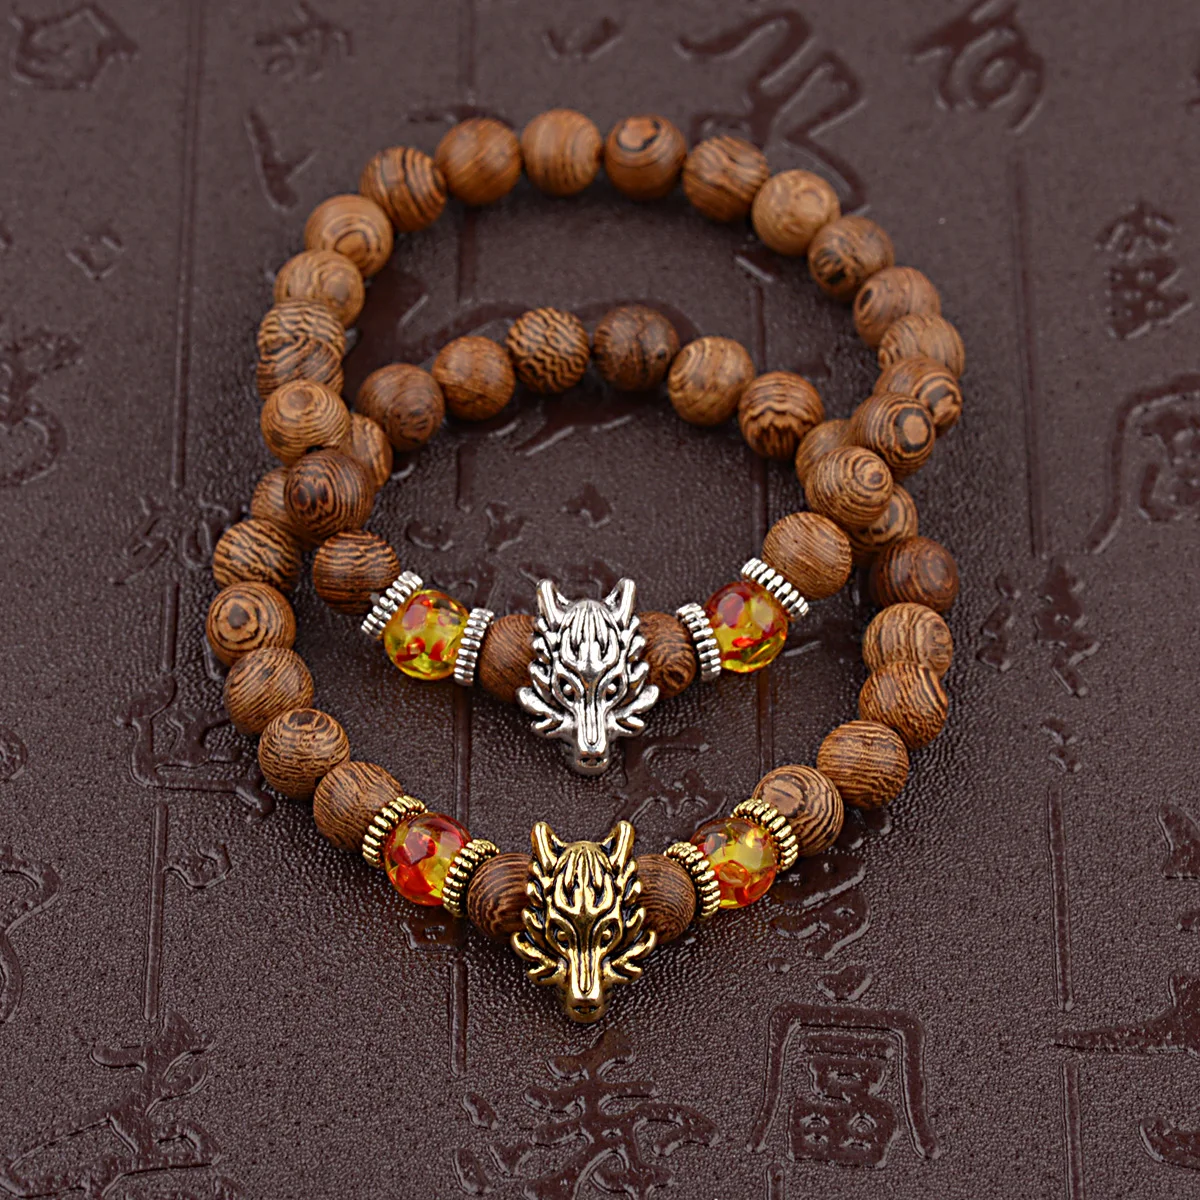 

Natural Stone Beads Yoga Valconic Healing Energy Lava Stone Wood Bracelet Dragon Head, As picture